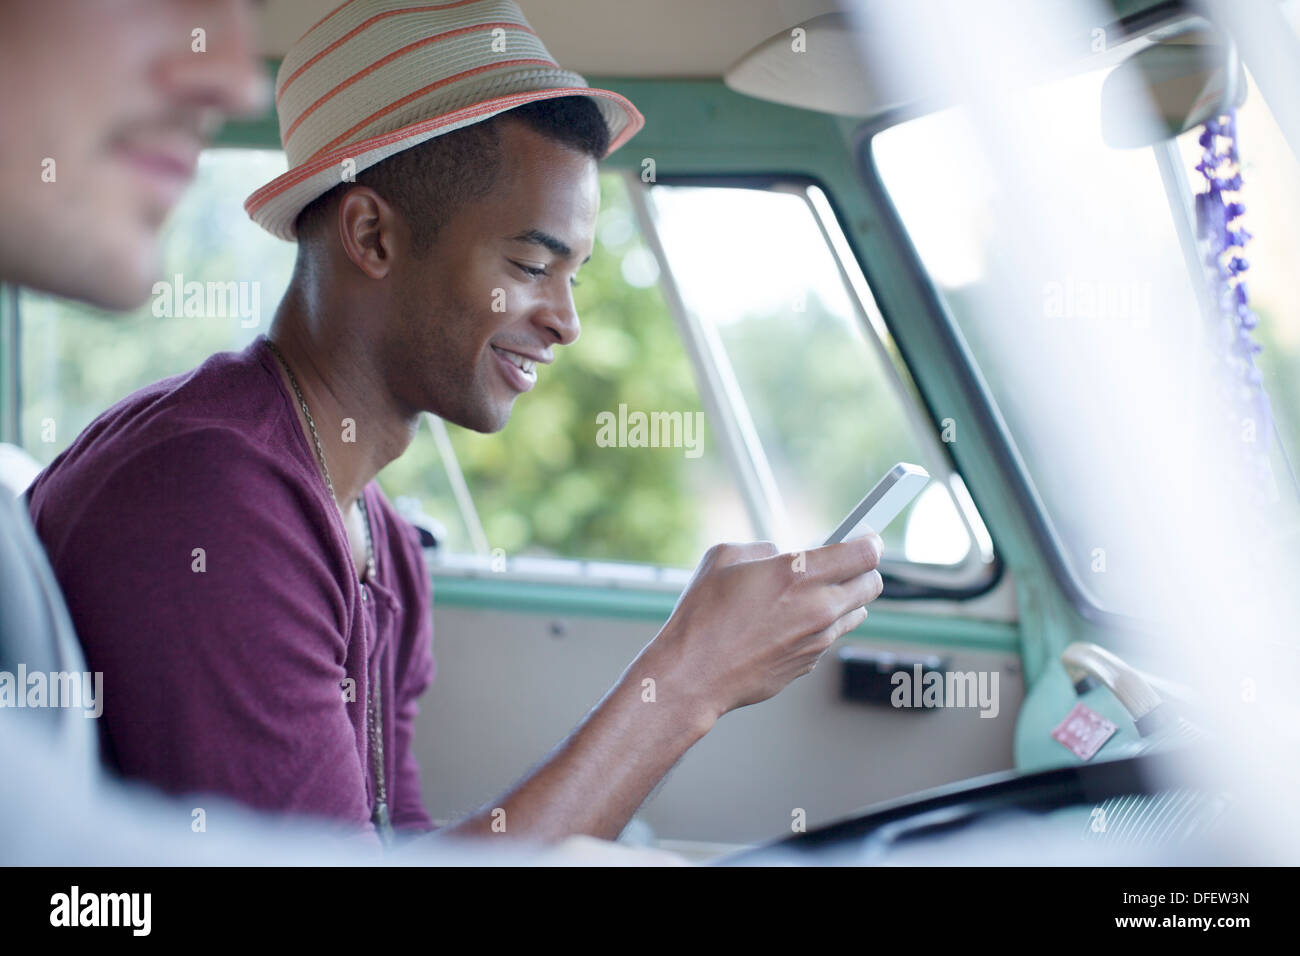 Man using cell phone in camper van Banque D'Images